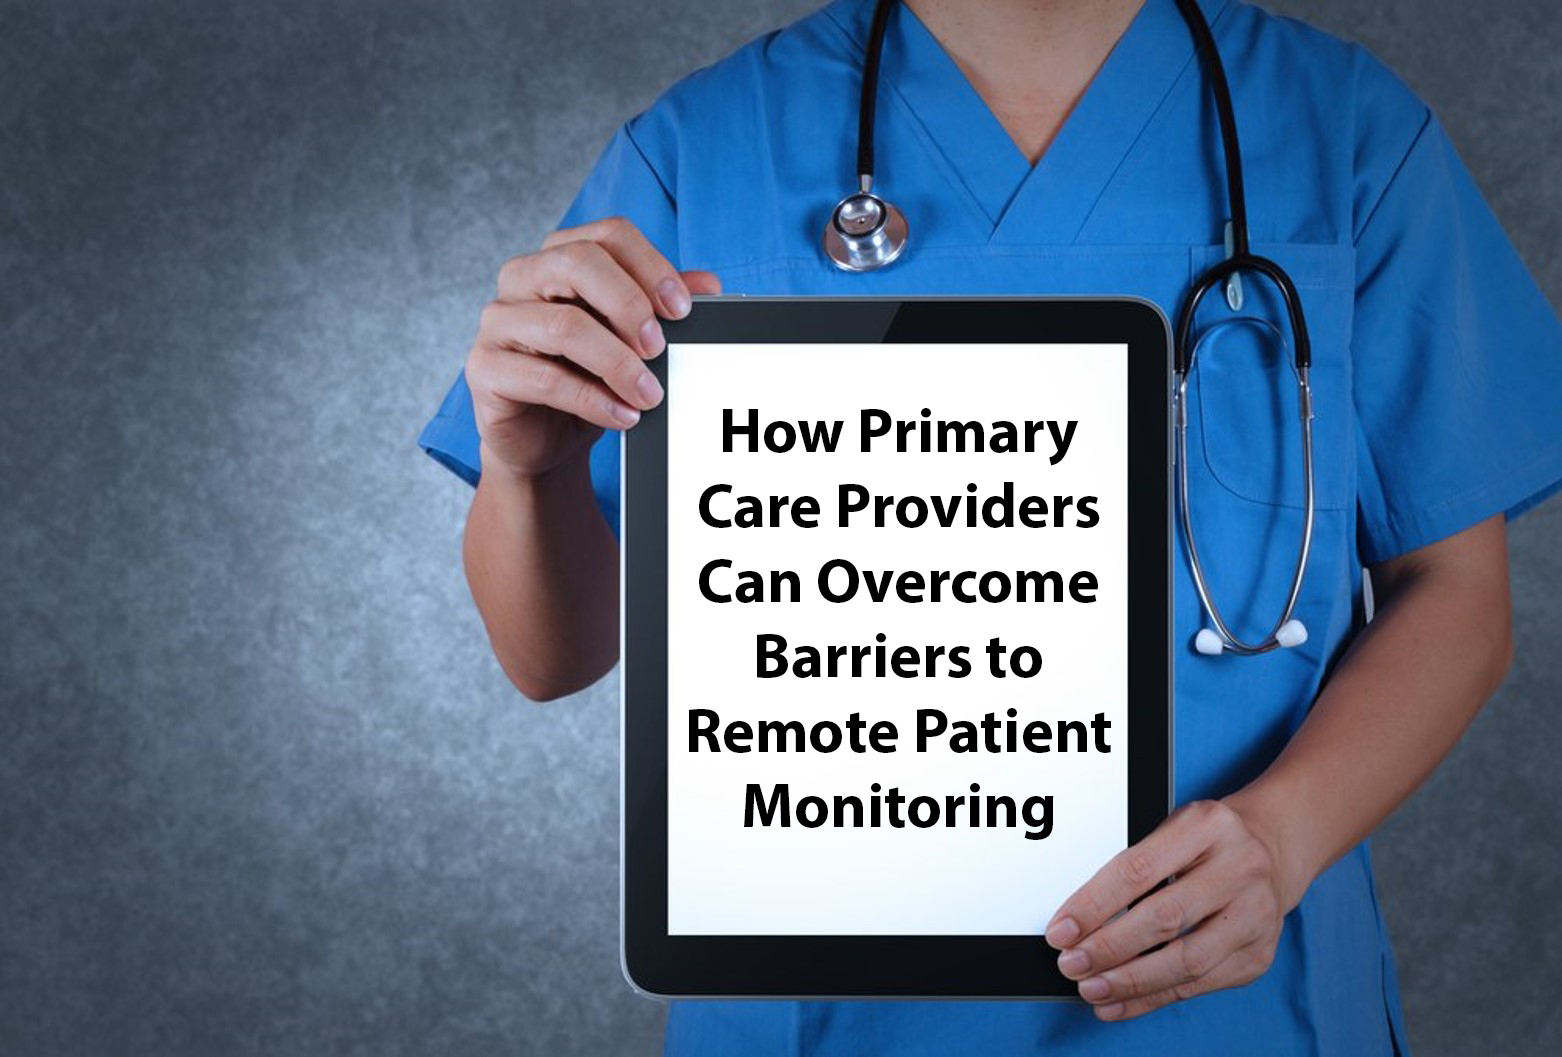 Doc holding tablet - How Primary Care Providers Can Overcome Barriers to Remote Patient Monitoring